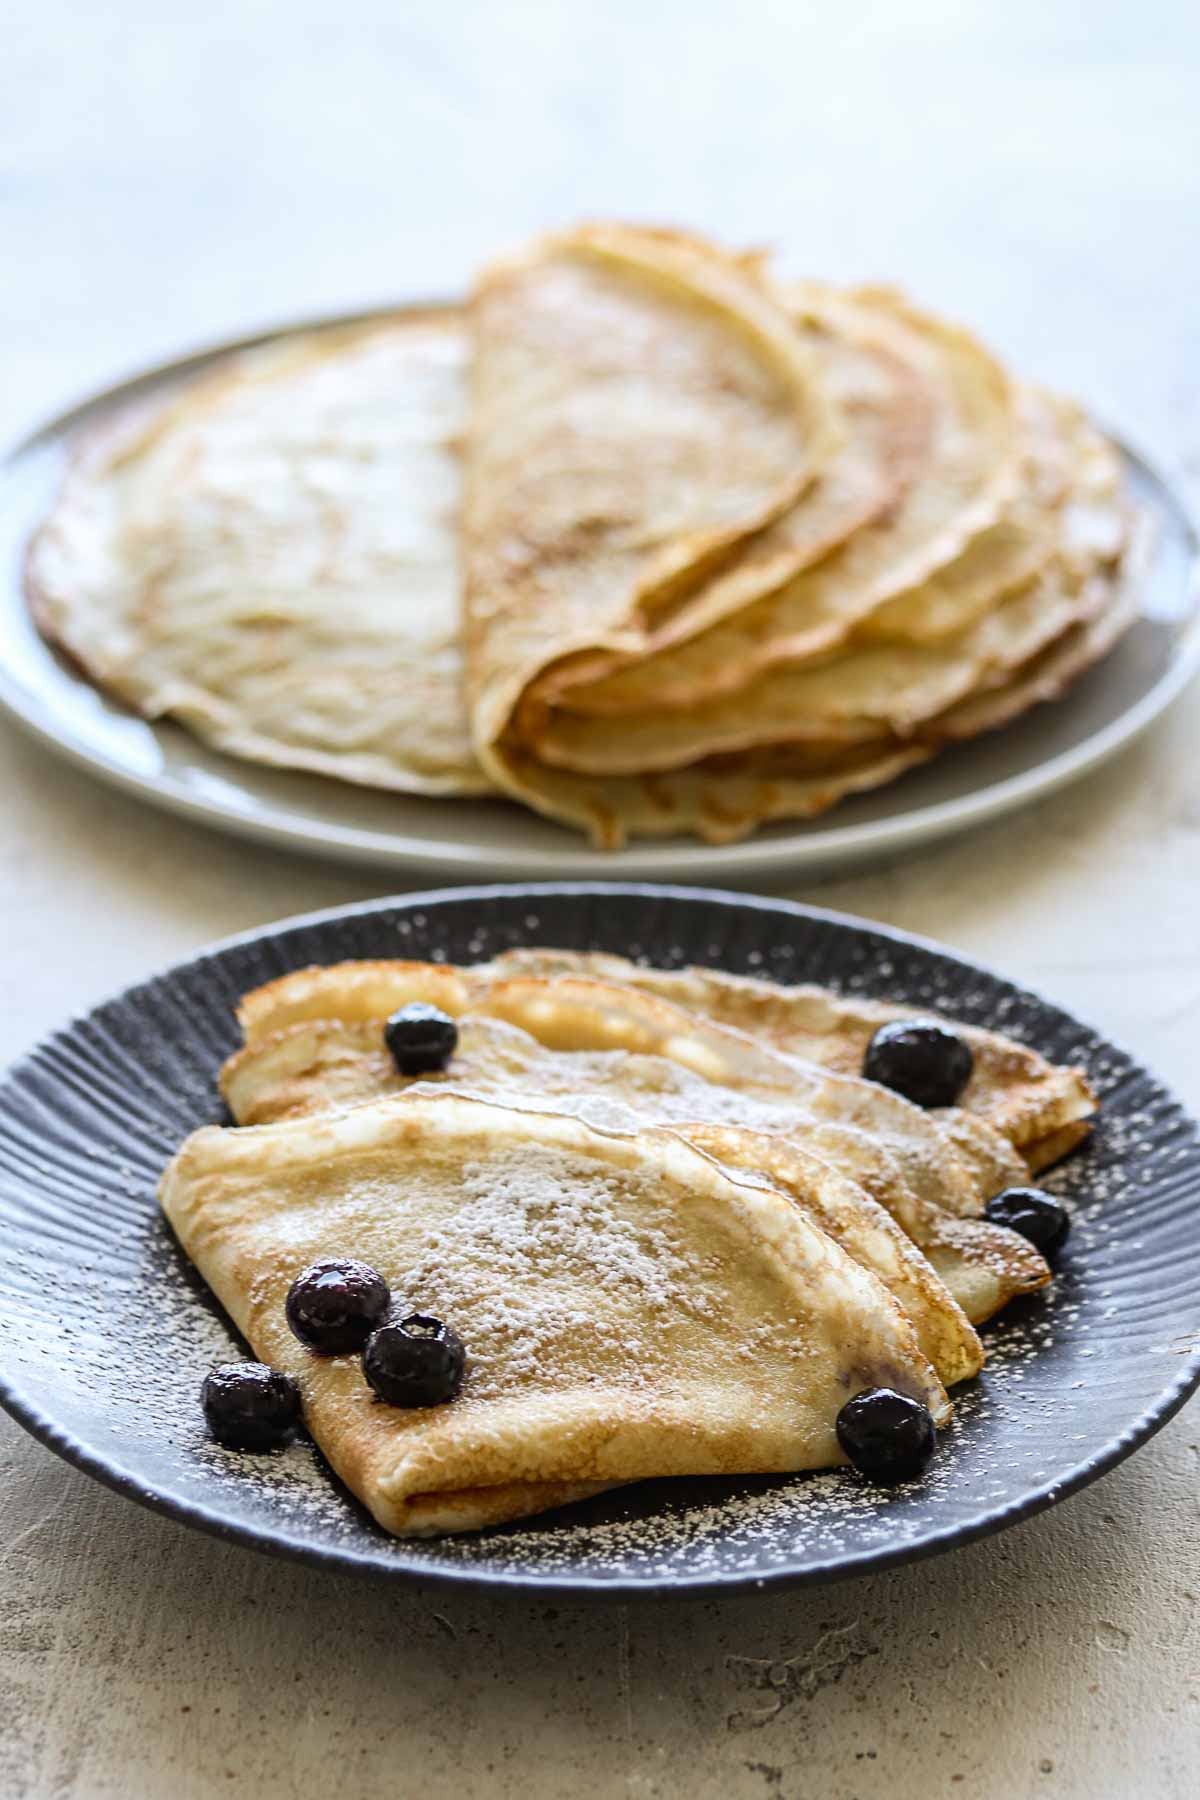 Two plates of sourdough crepes, one plain, one with icing sugar and blueberries.